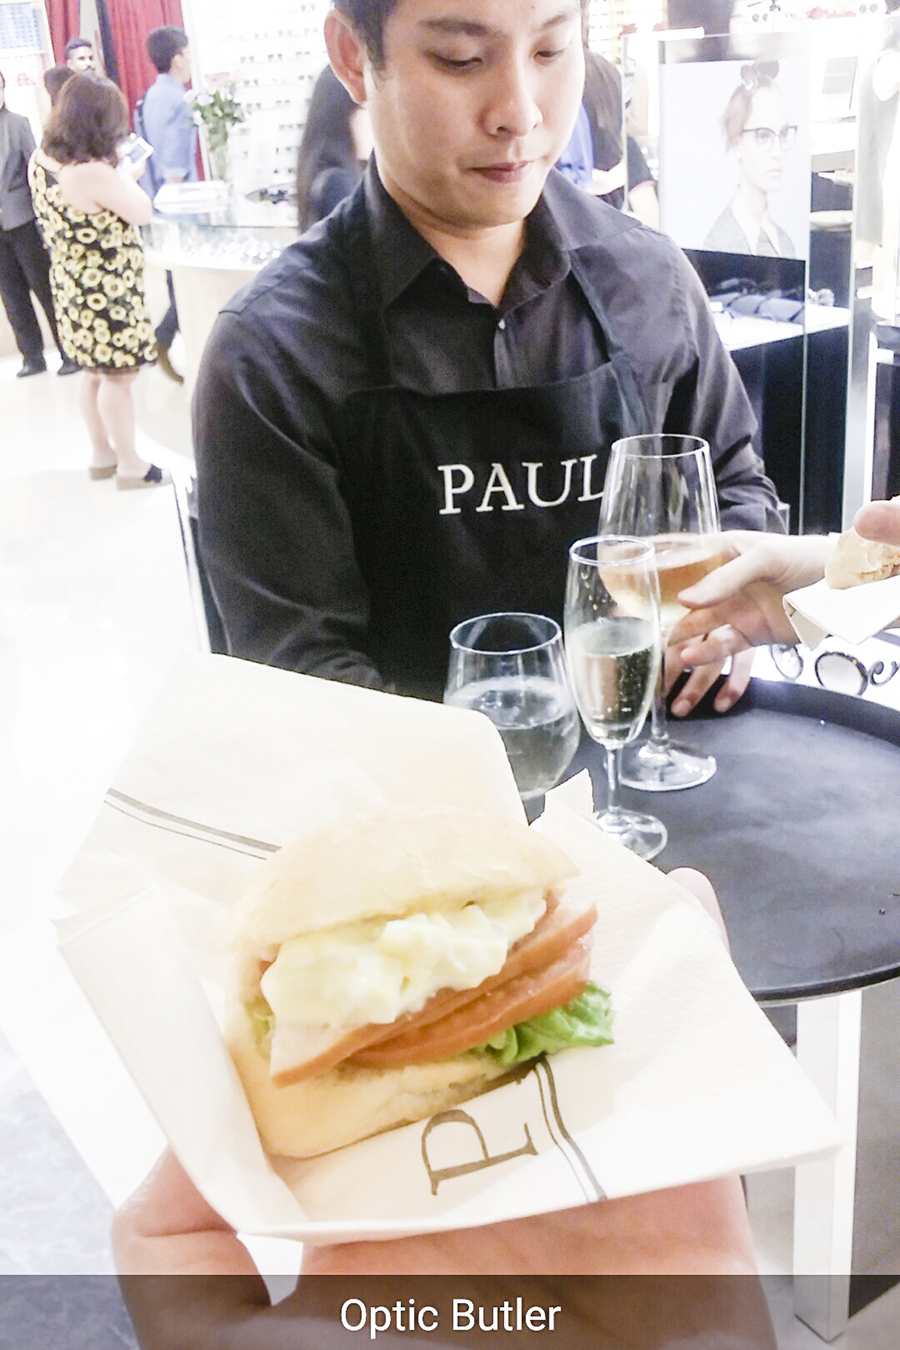 Sandwich, champagne from Paul at the Her World x Optic Butler Event, Paragon, Singapore.